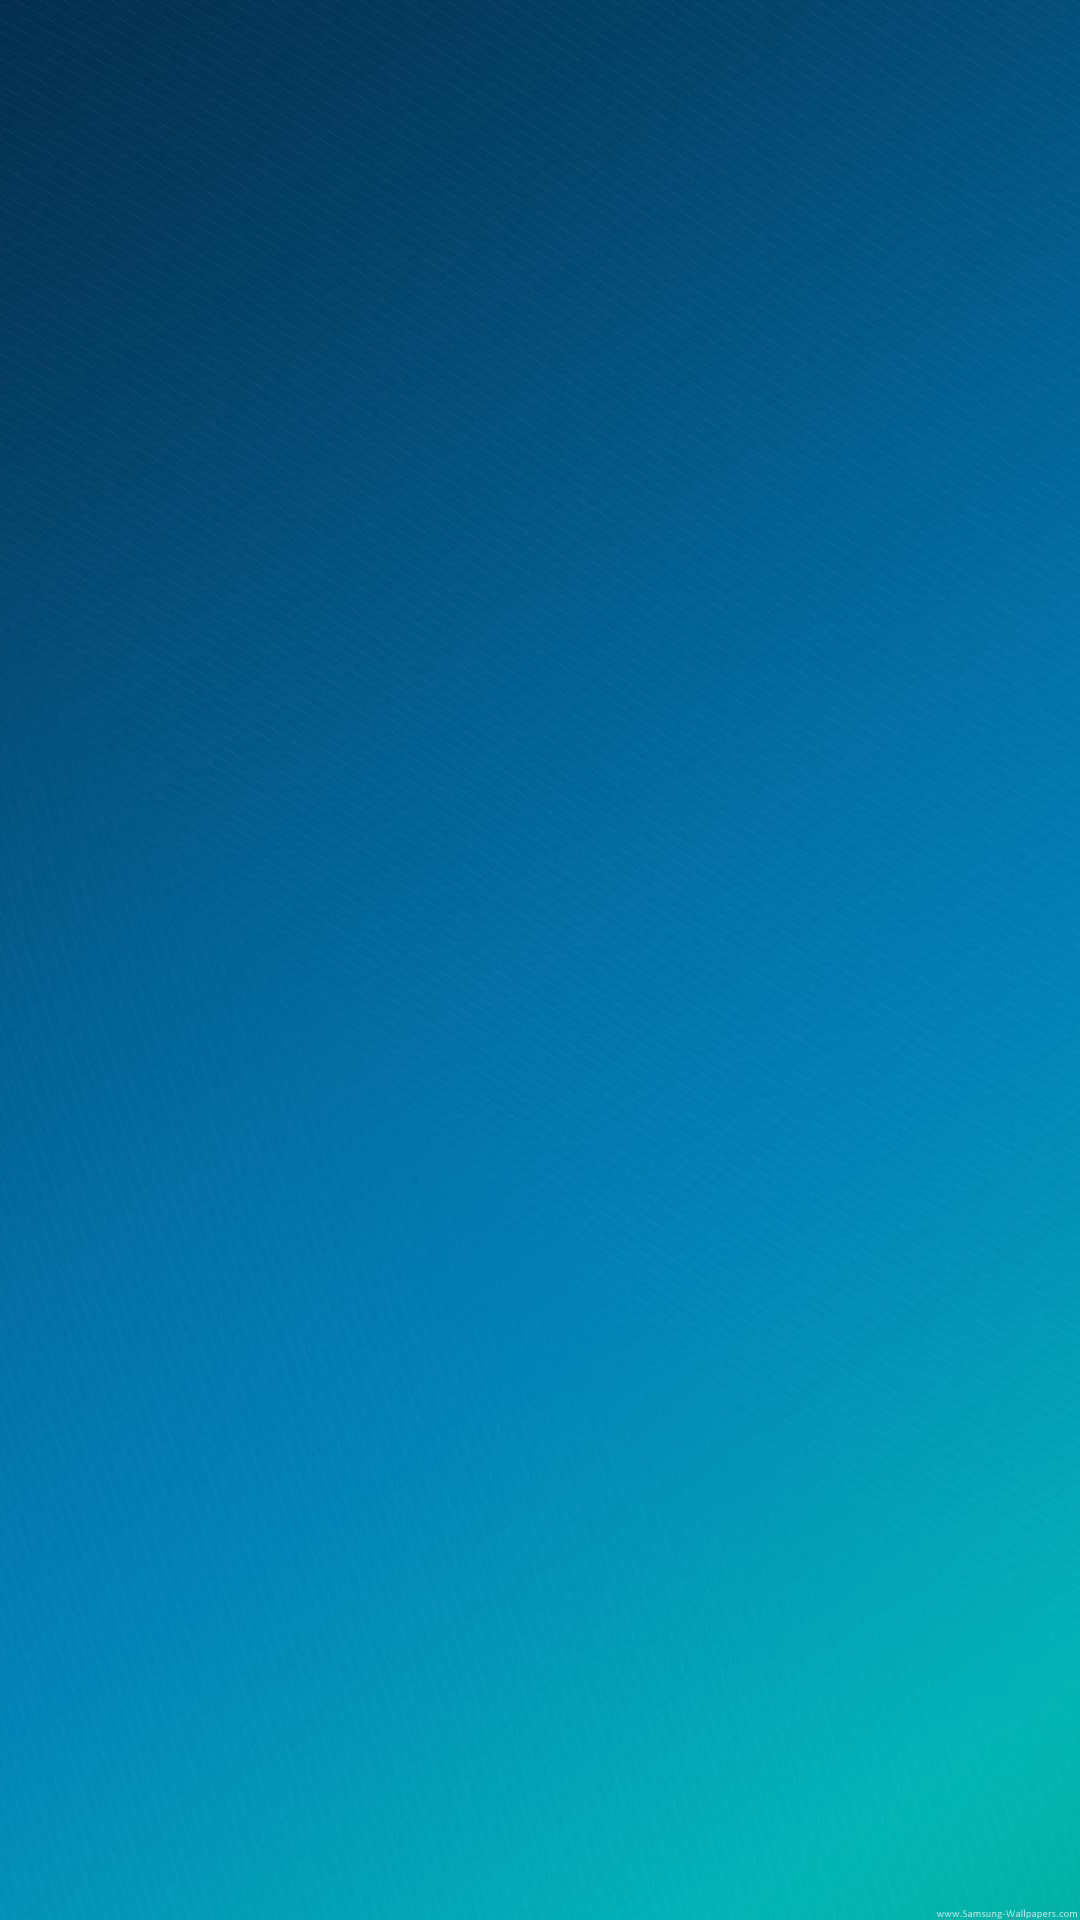 These Samsung Galaxy Note Wallpaper